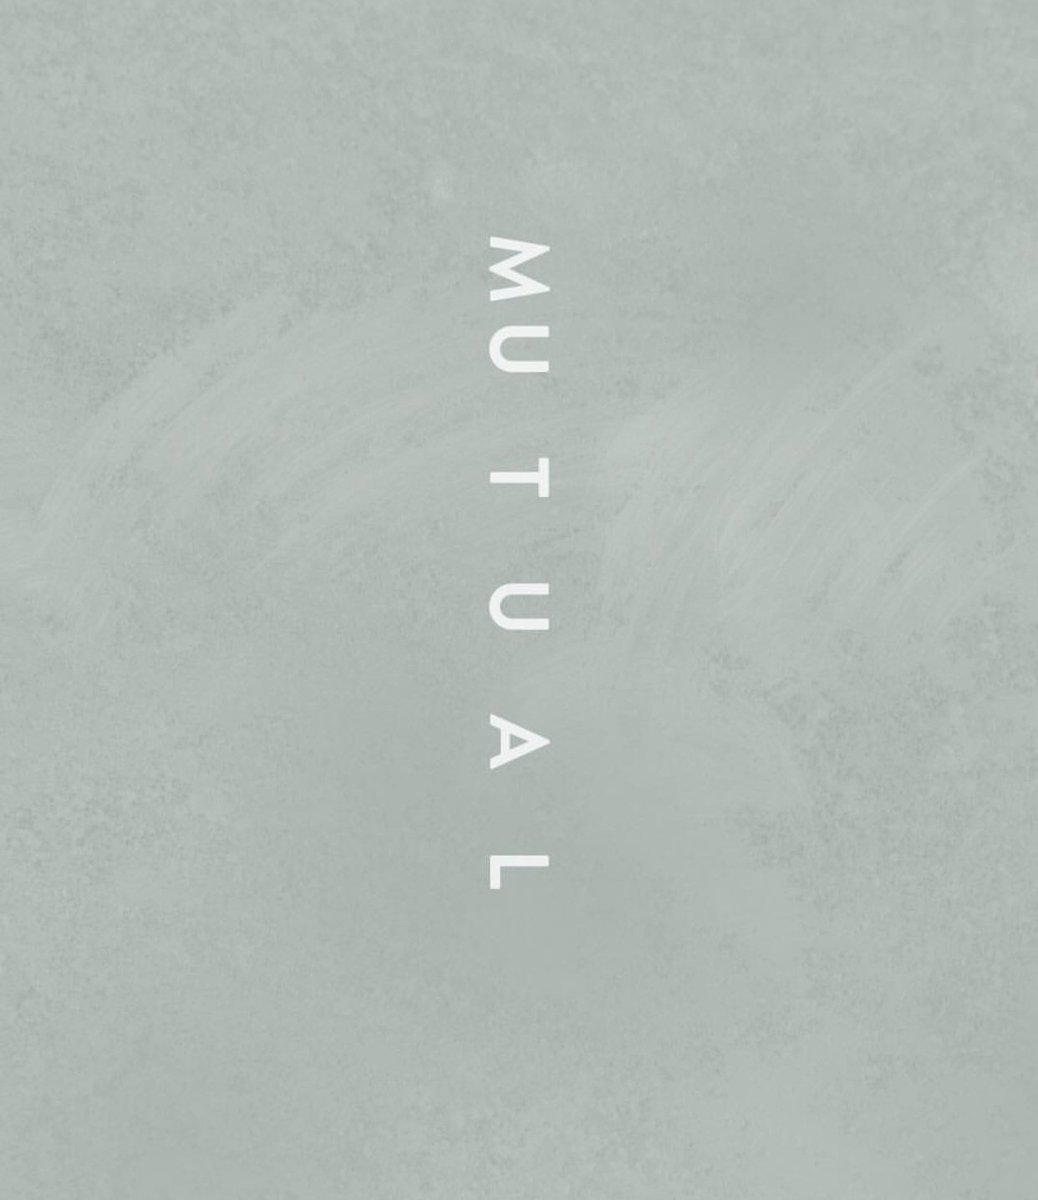 MUTUAL - " The slow build to the chorus is bound to get people pumped up" ( @umusic) :  http://www.umusic.ca/2018/06/08/shawn-mendes-album-mood/